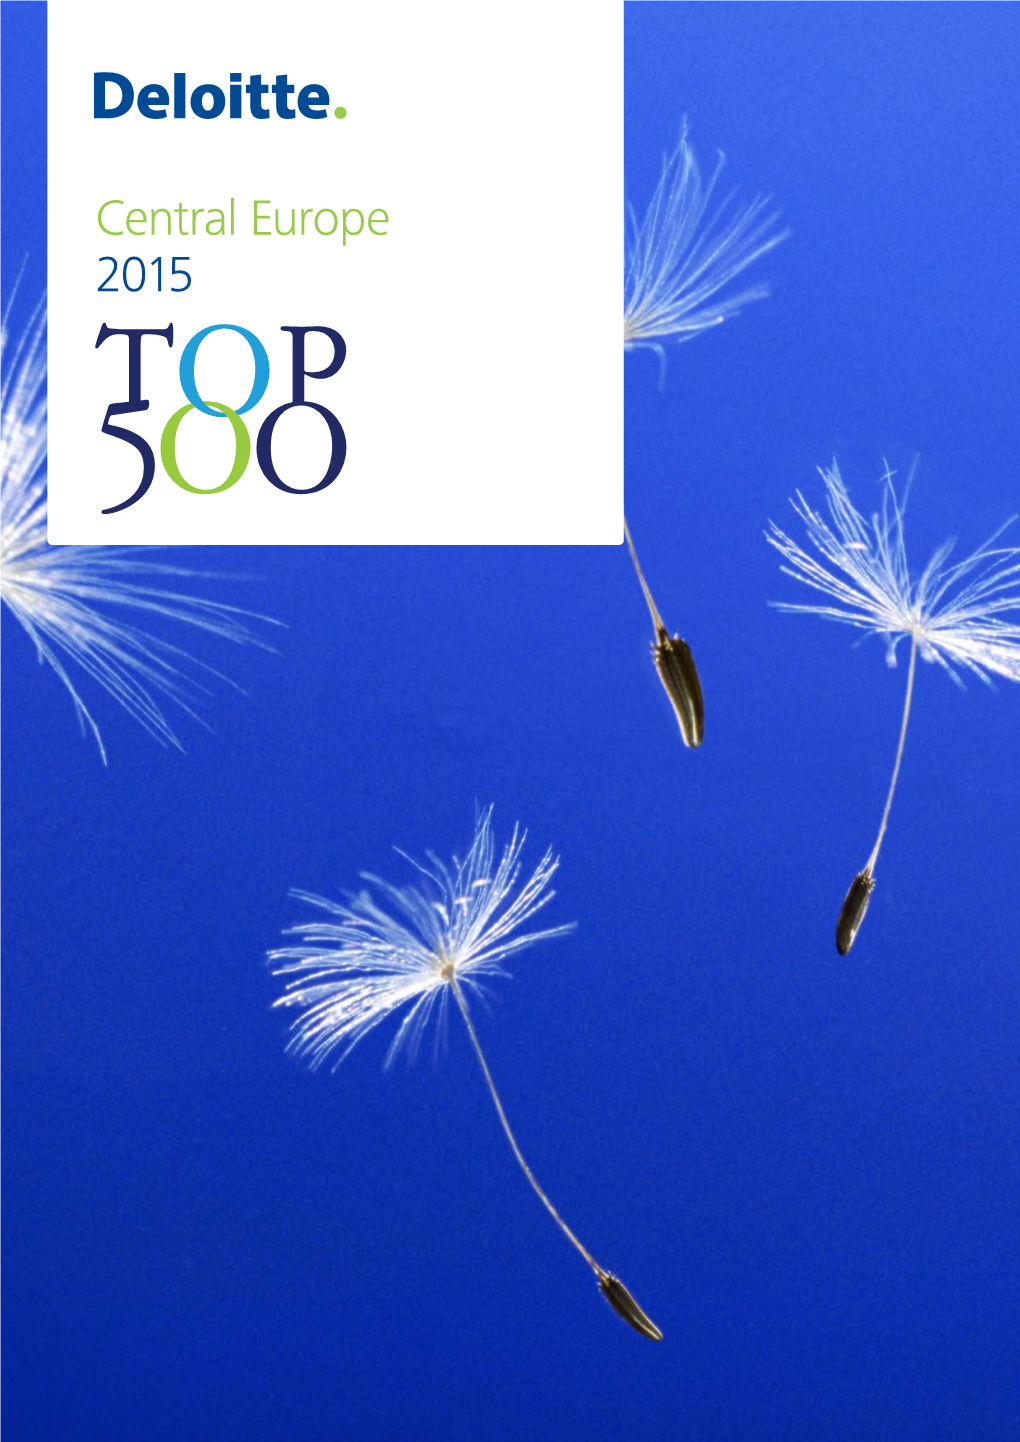 Central Europe 2015 Seeds for Growth 500 Companies and 18 Countries Building a Sustainable Future